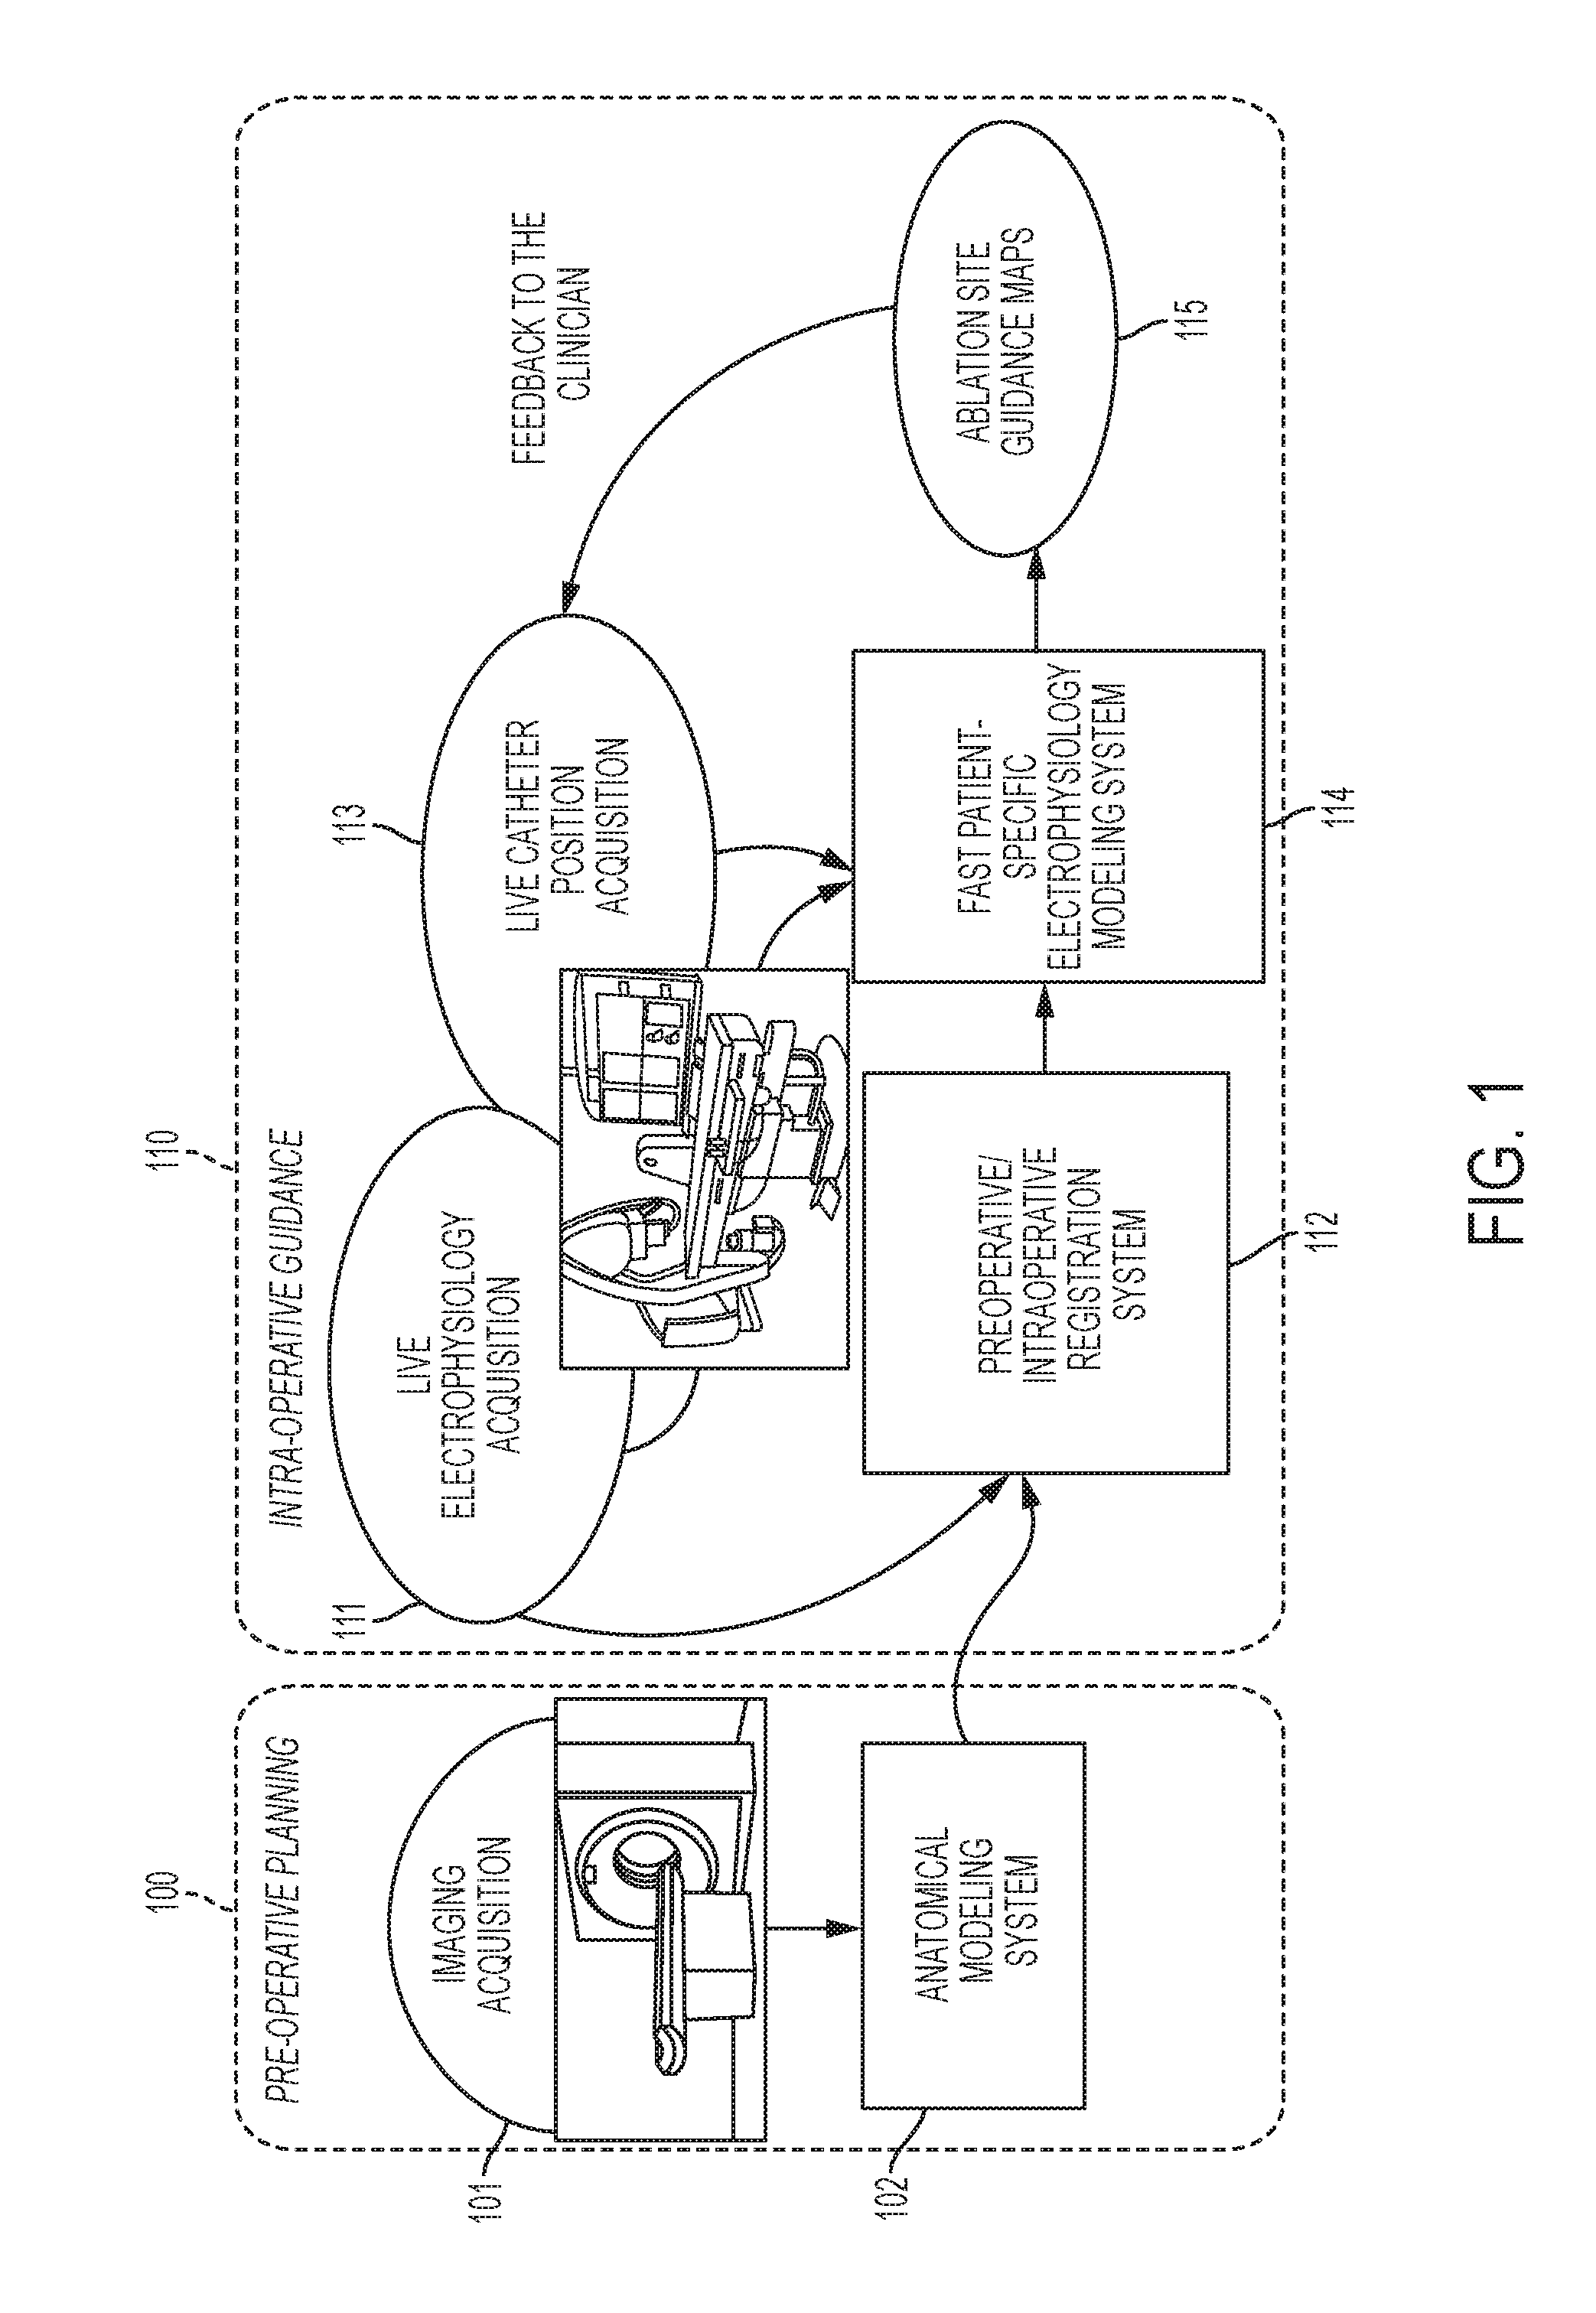 System and method for patient specific planning and guidance of ablative procedures for cardiac arrhythmias